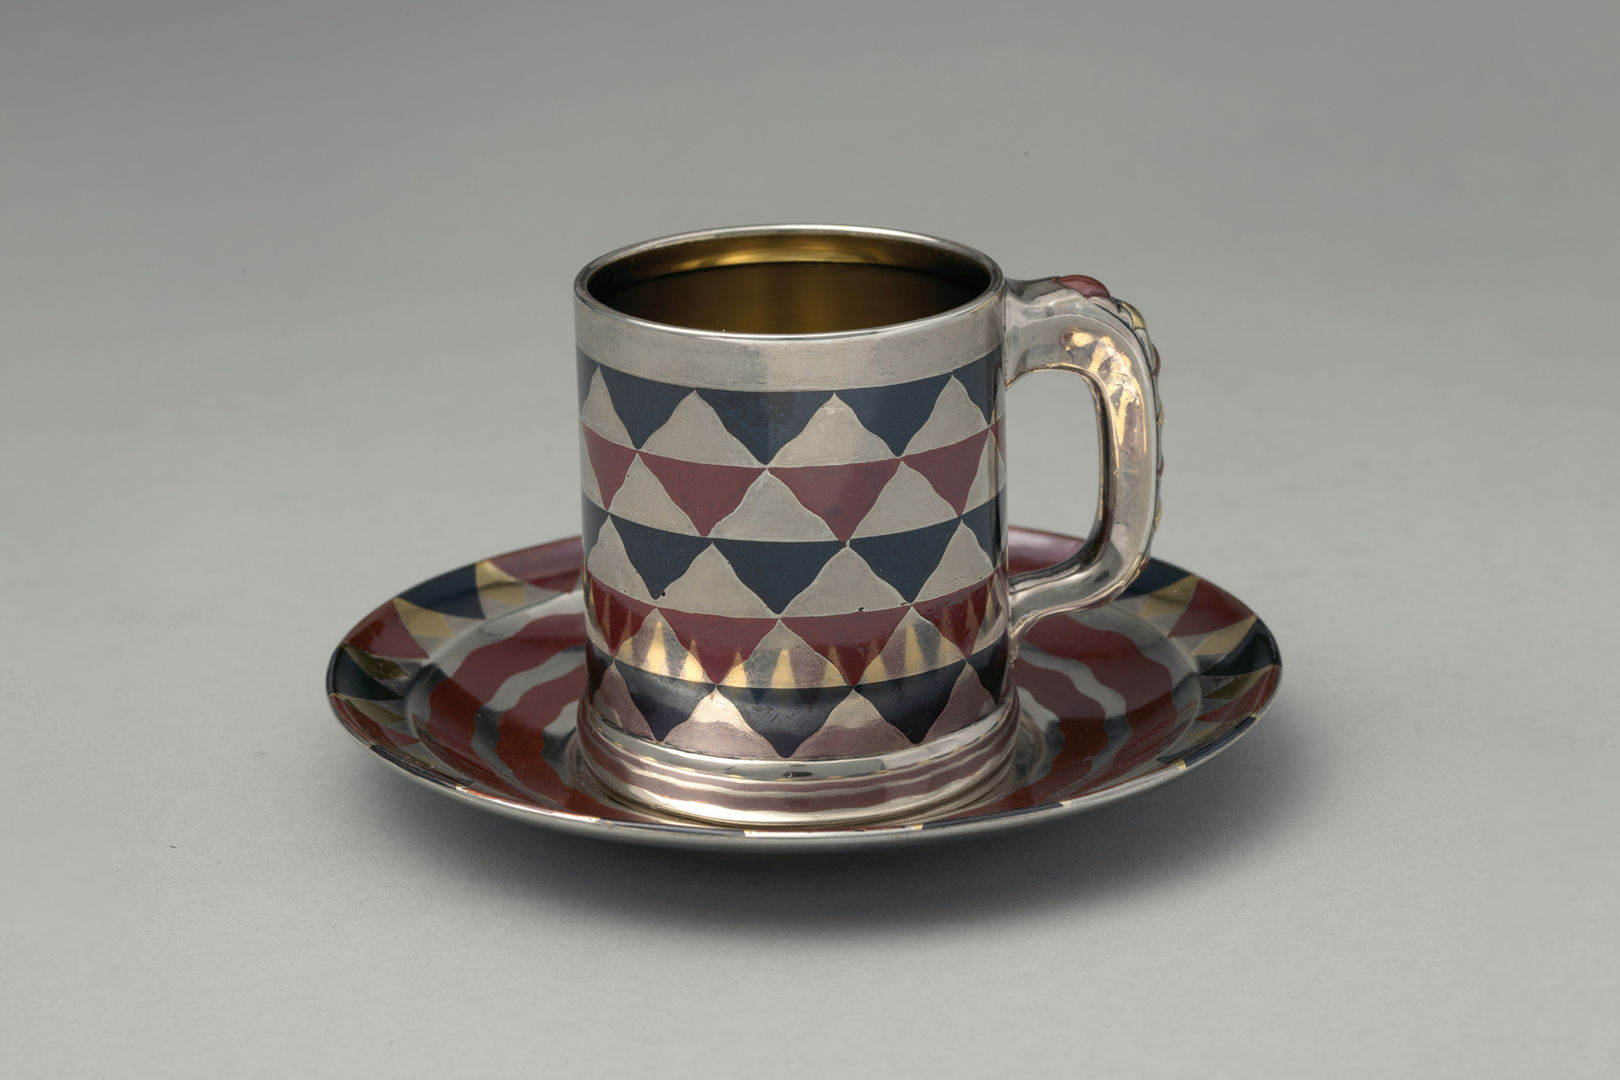 A silver, navy, and maroon cylindrical cup with a handle rests on a matching saucer. The cup and saucer are reflective and adorned with an inlay design of a checkerboard pattern of wavy triangle shapes.